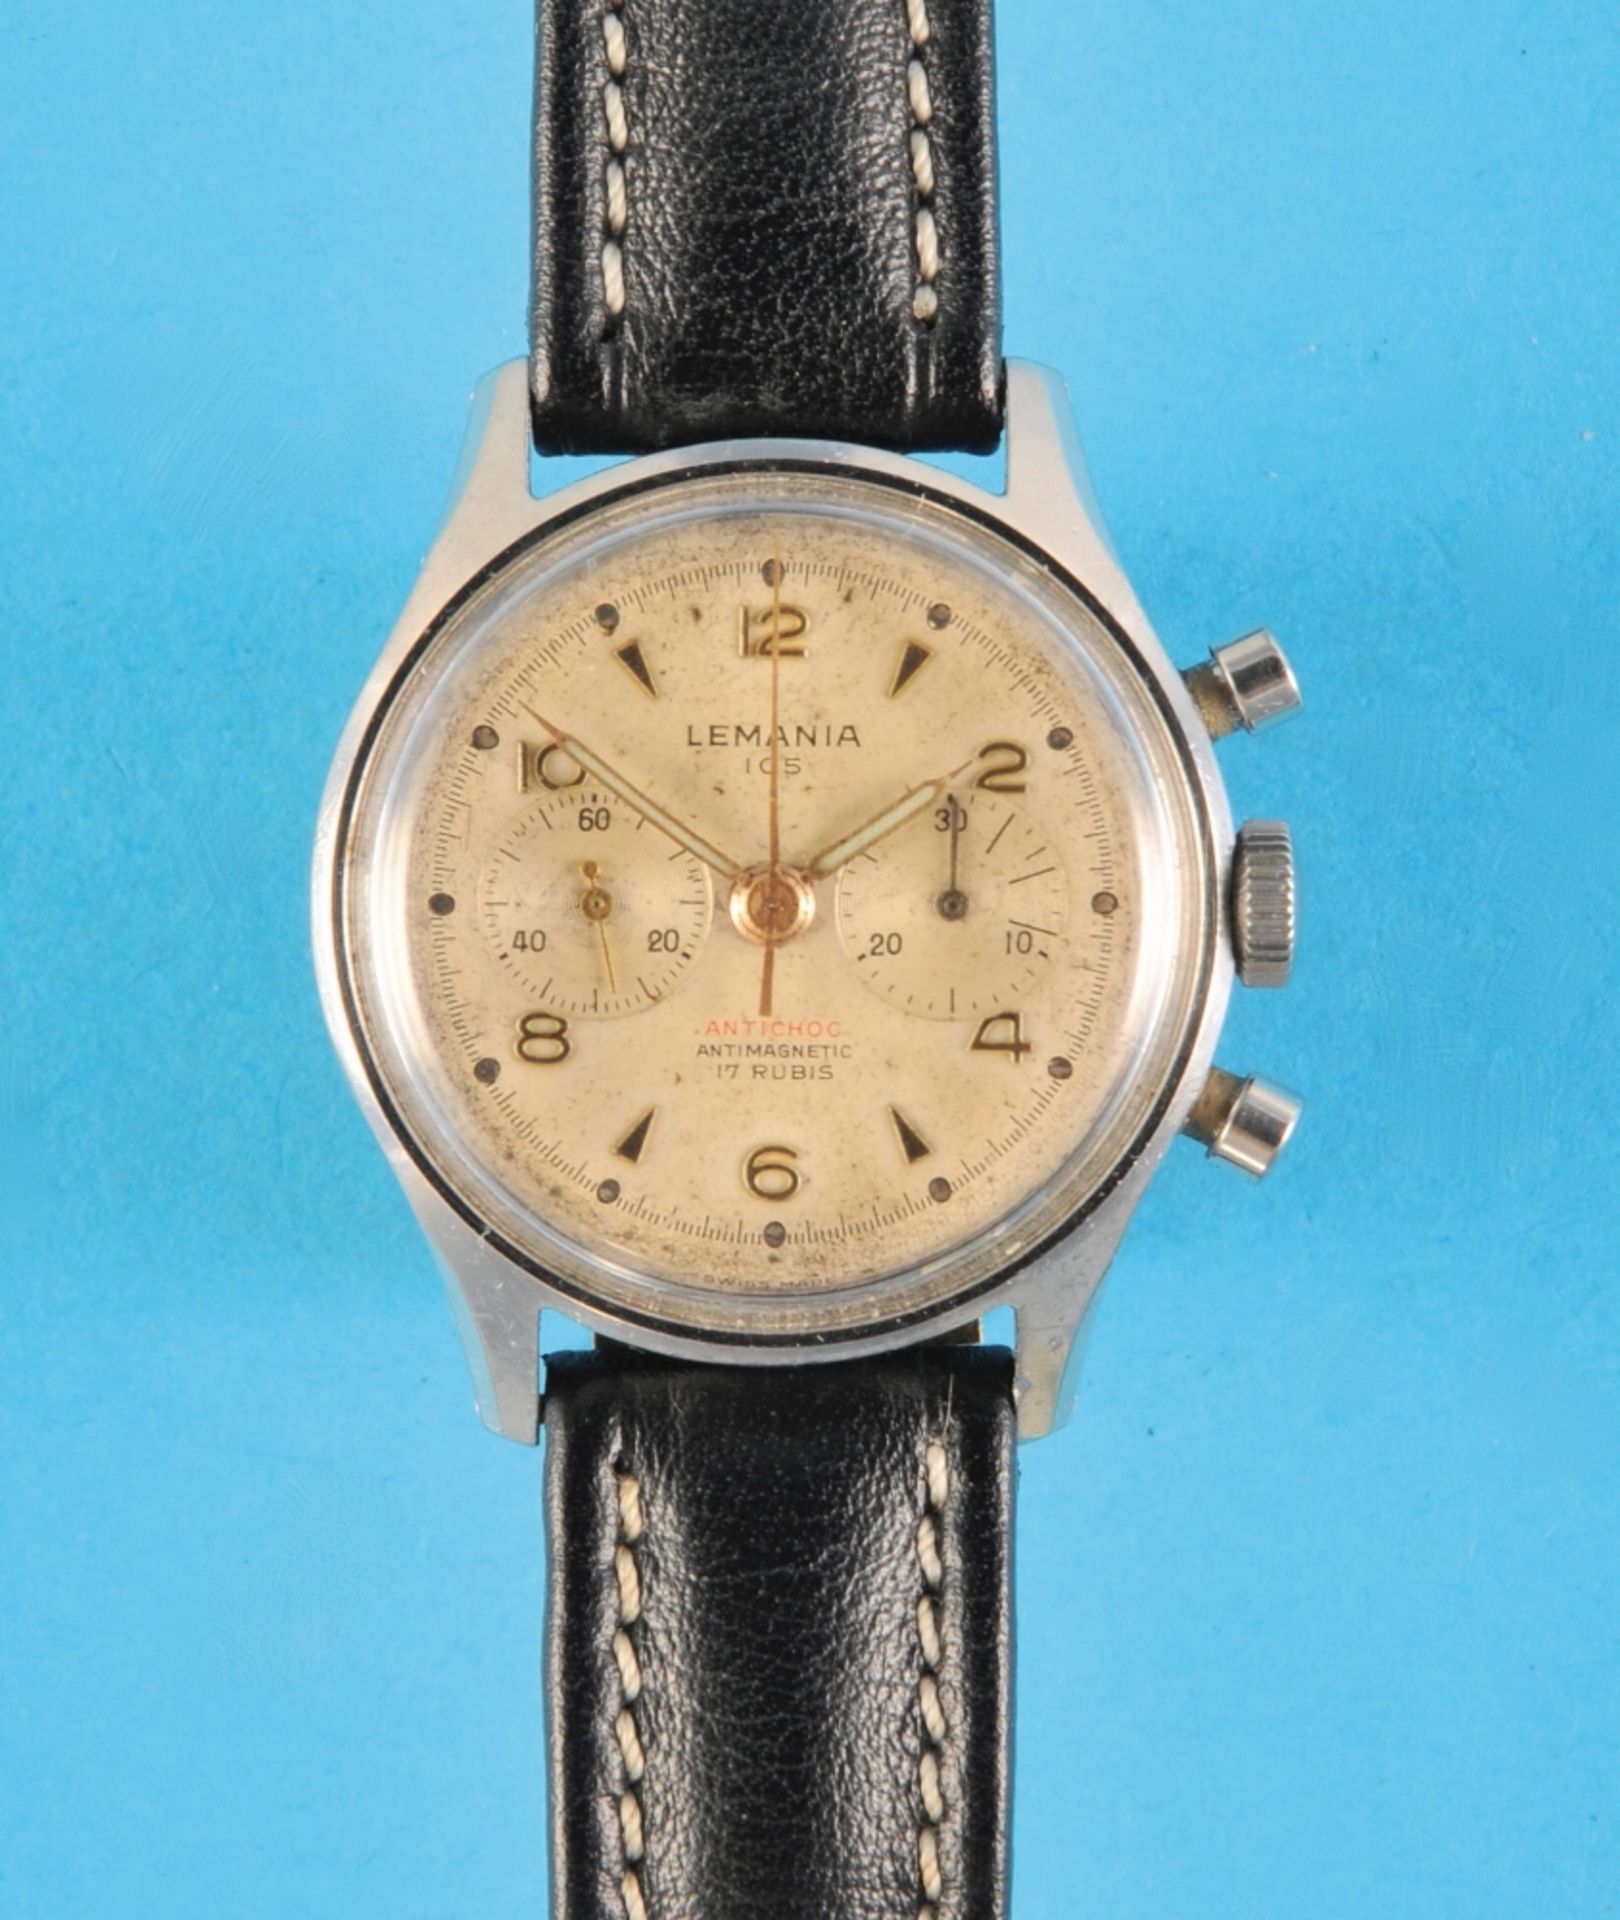 Lemania 105 Vintage wristwatch with chronograph and 30-minute counter, Antichoc, 